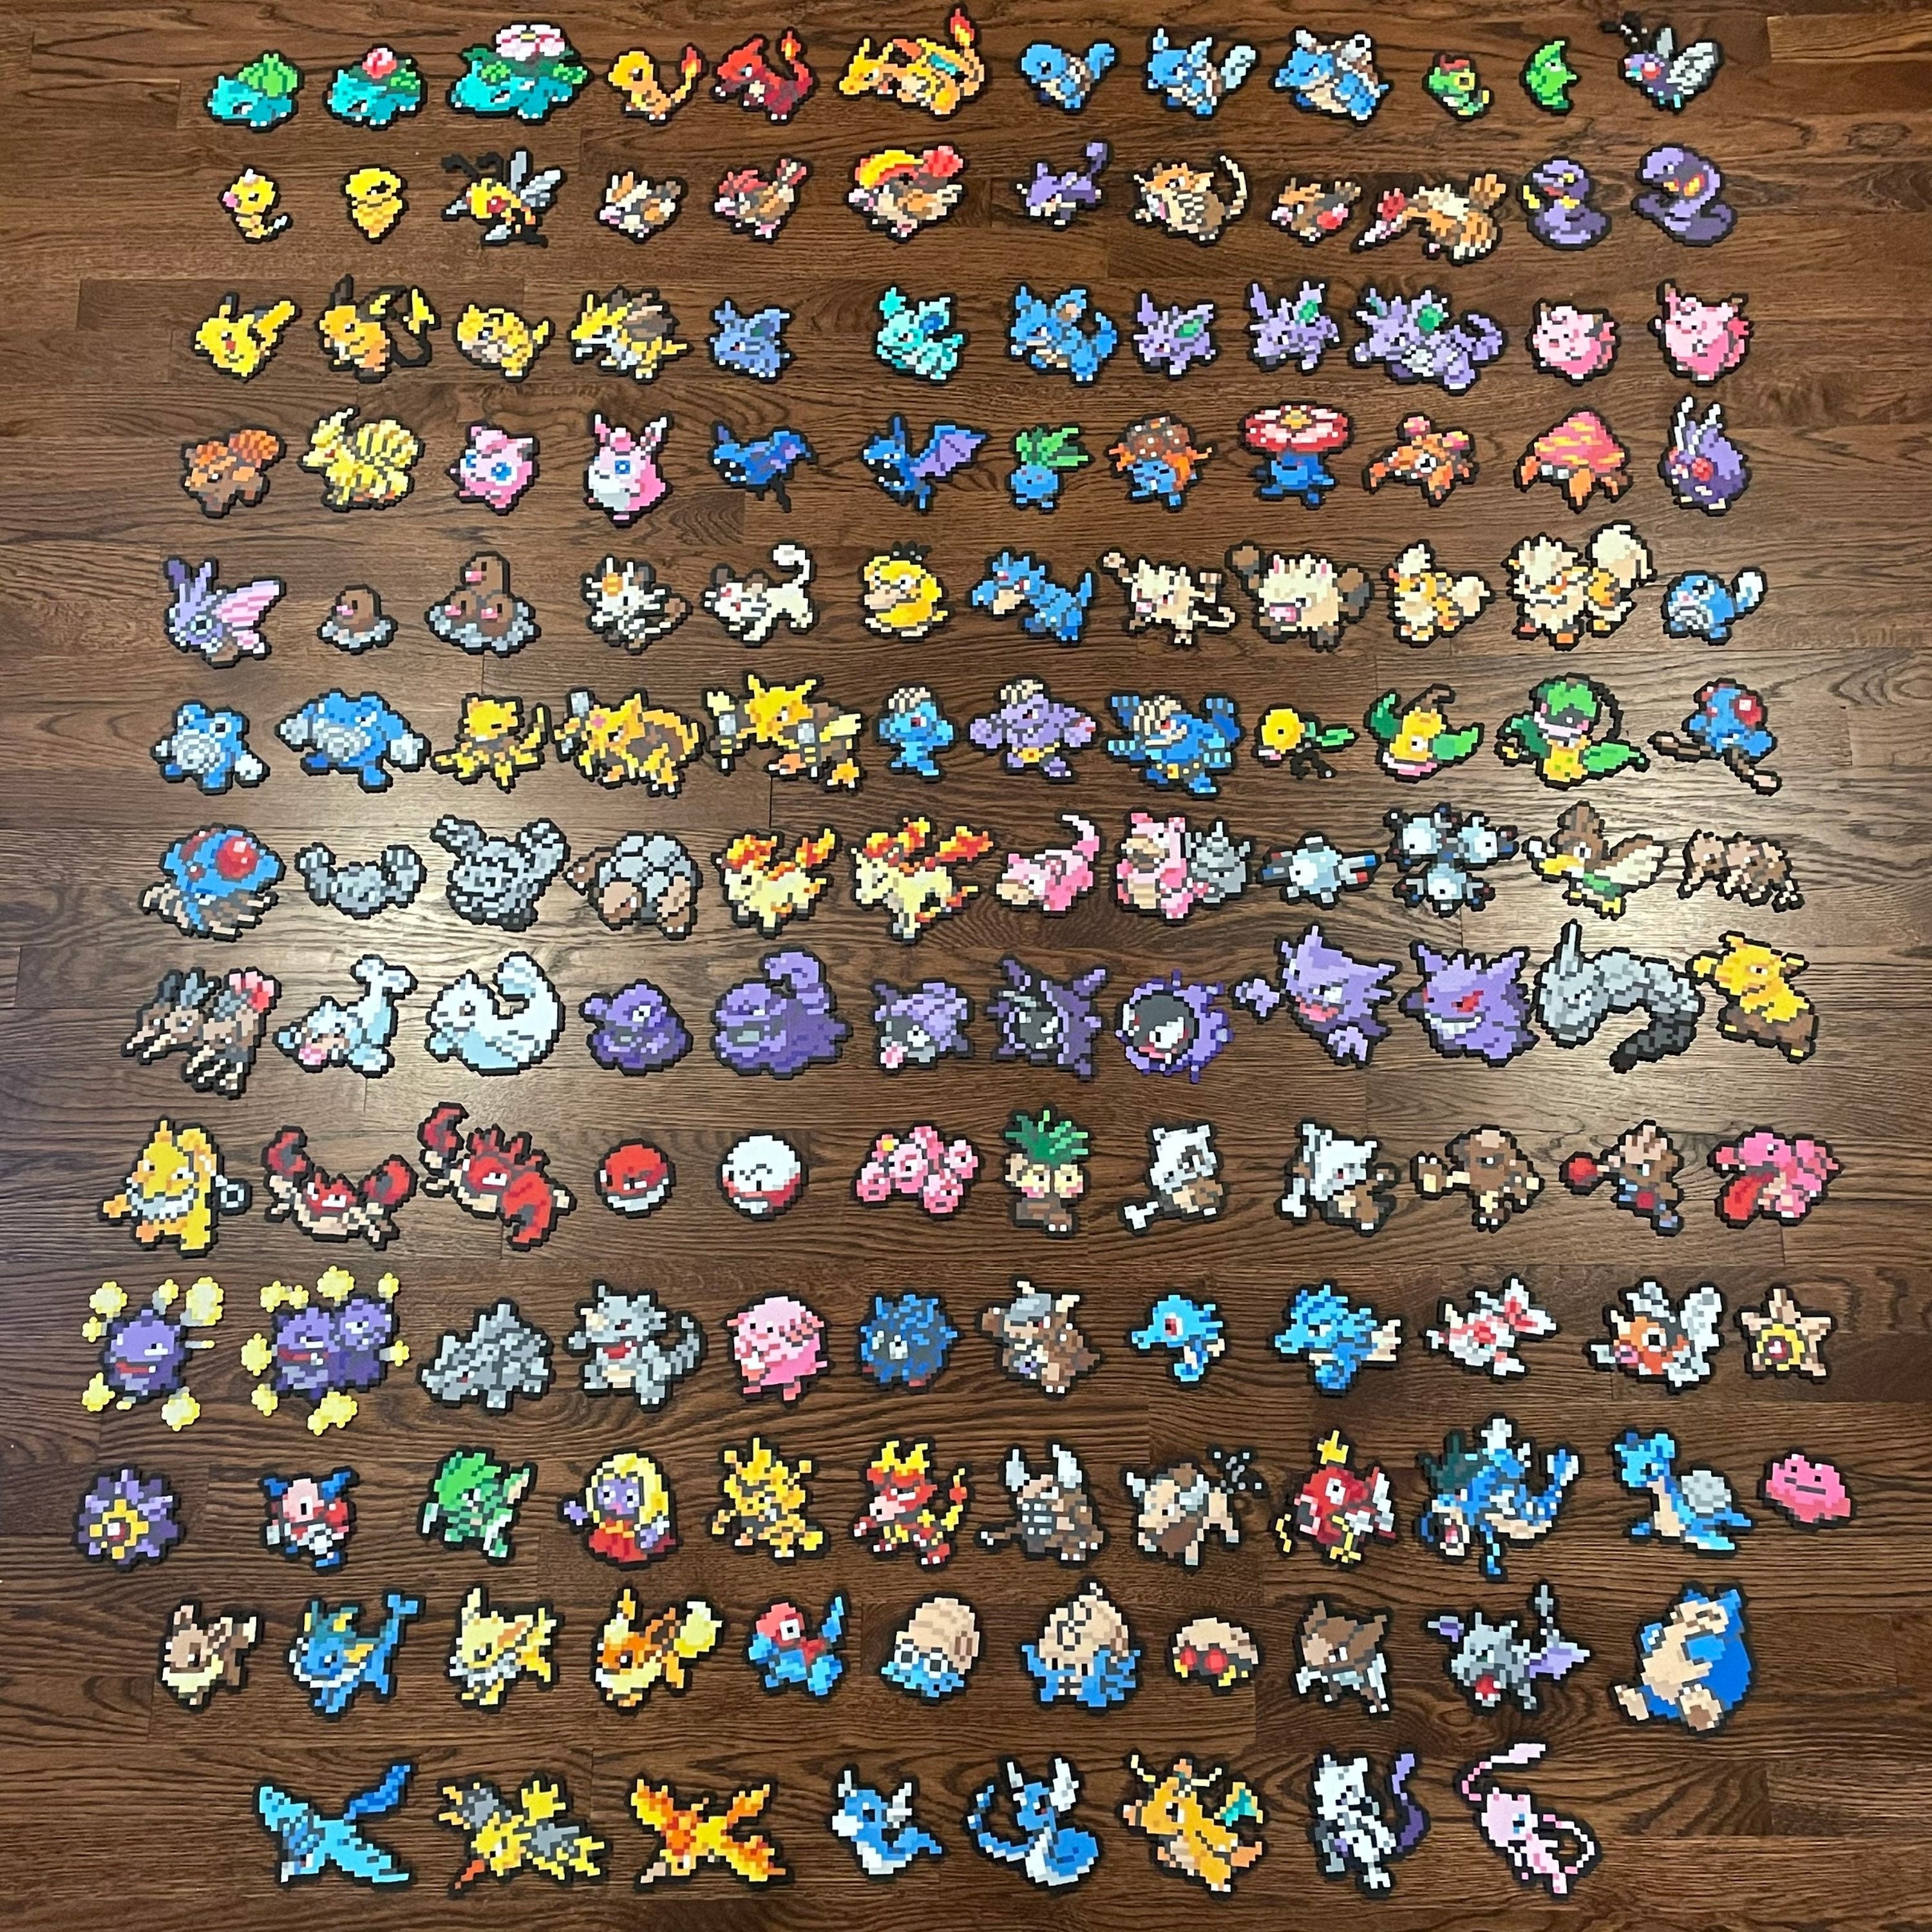 Back in my day, we only had 151 Pokemon AND WE WERE THANKFUL! : r/nostalgia